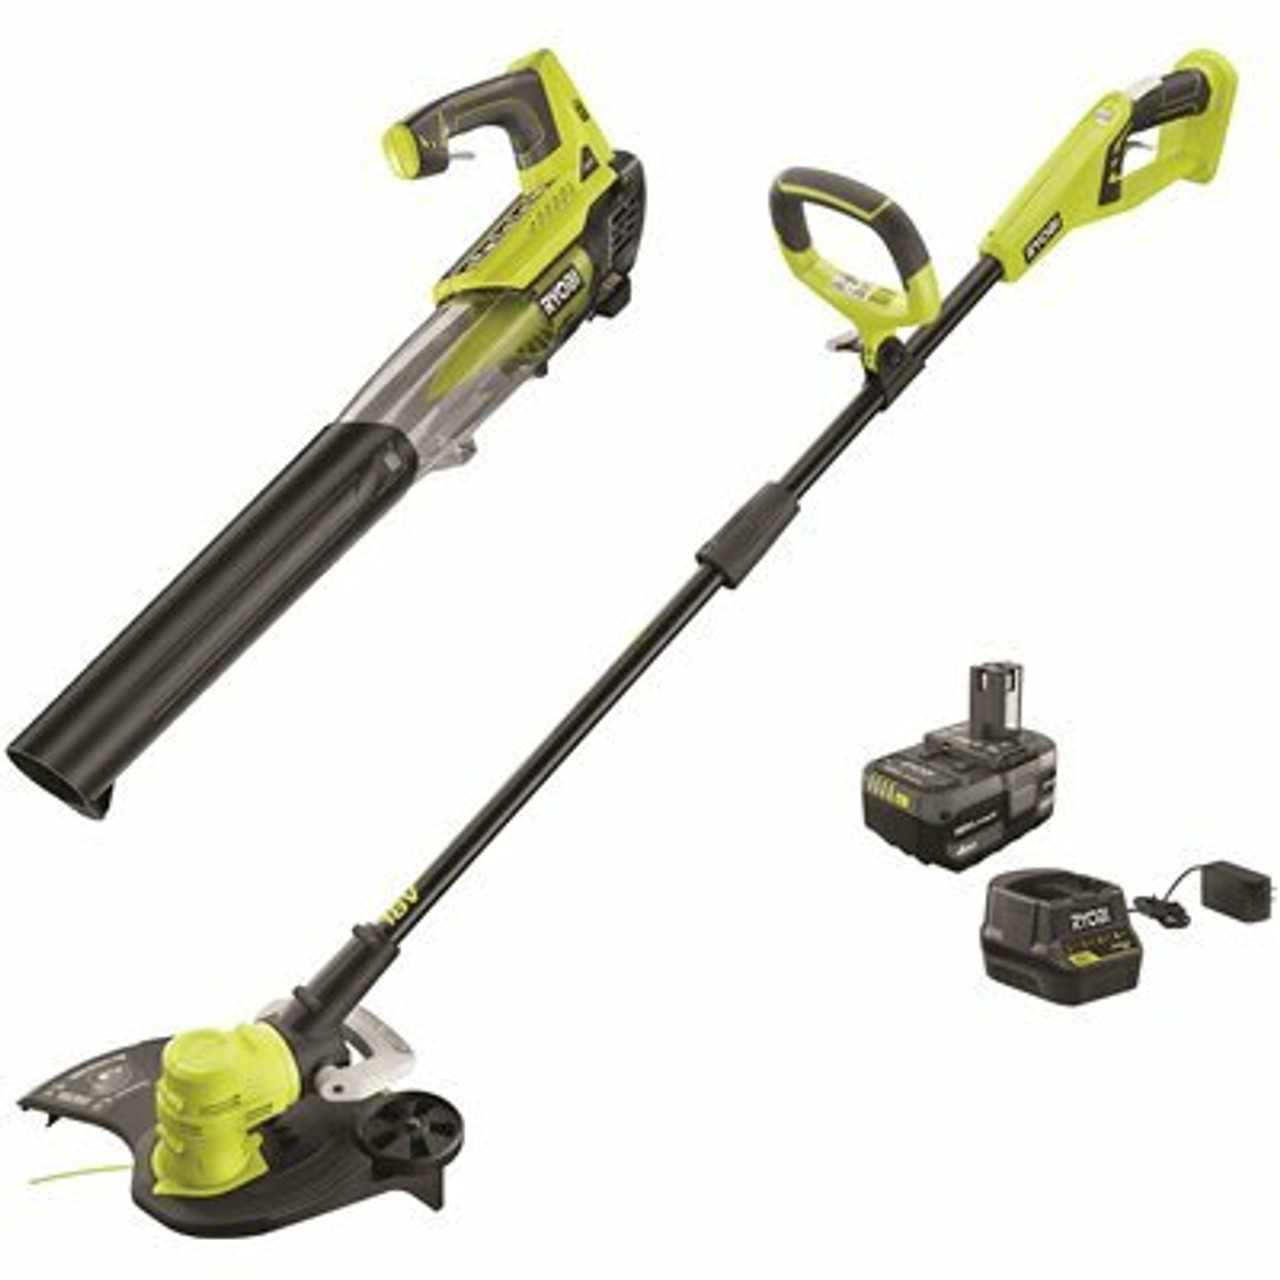 Ryobi One+ 18V Cordless Battery String Trimmer/Edger And Jet Fan Blower Combo Kit With 4.0 Ah Battery And Charger